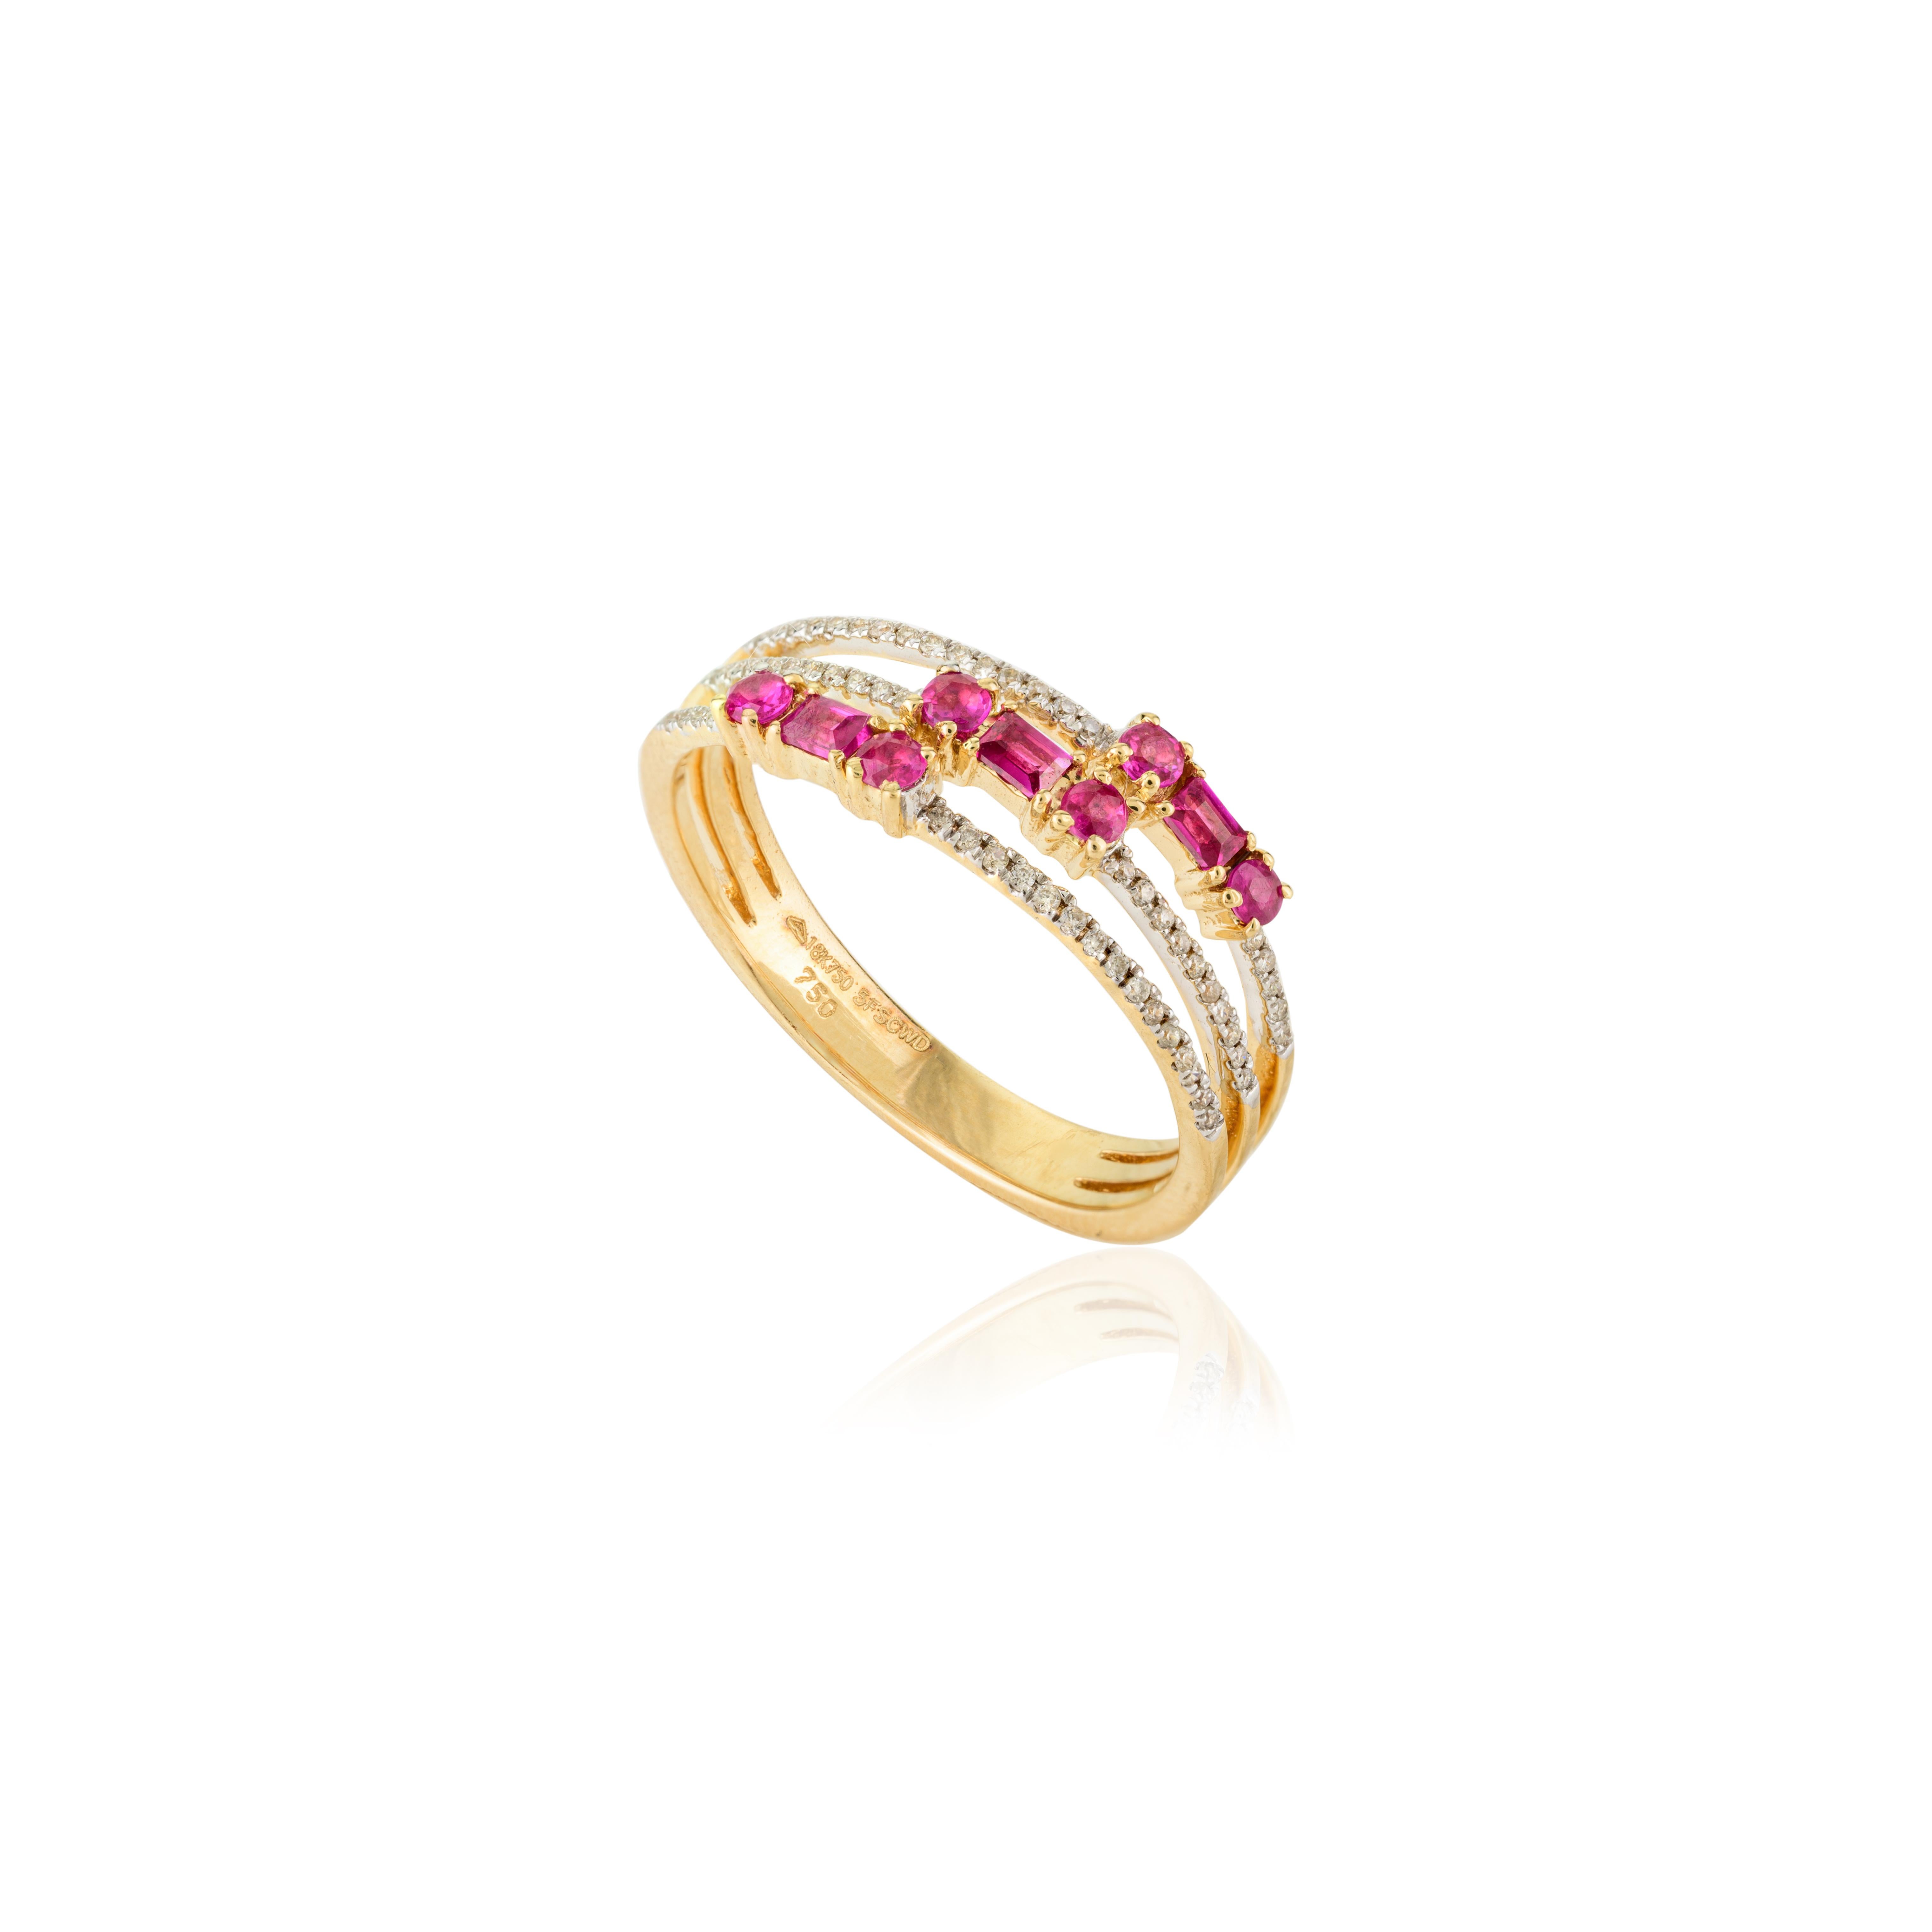 For Sale:  Designer Ruby Diamond Wedding Band Ring Gift for Mom in 18k Yellow Gold 8